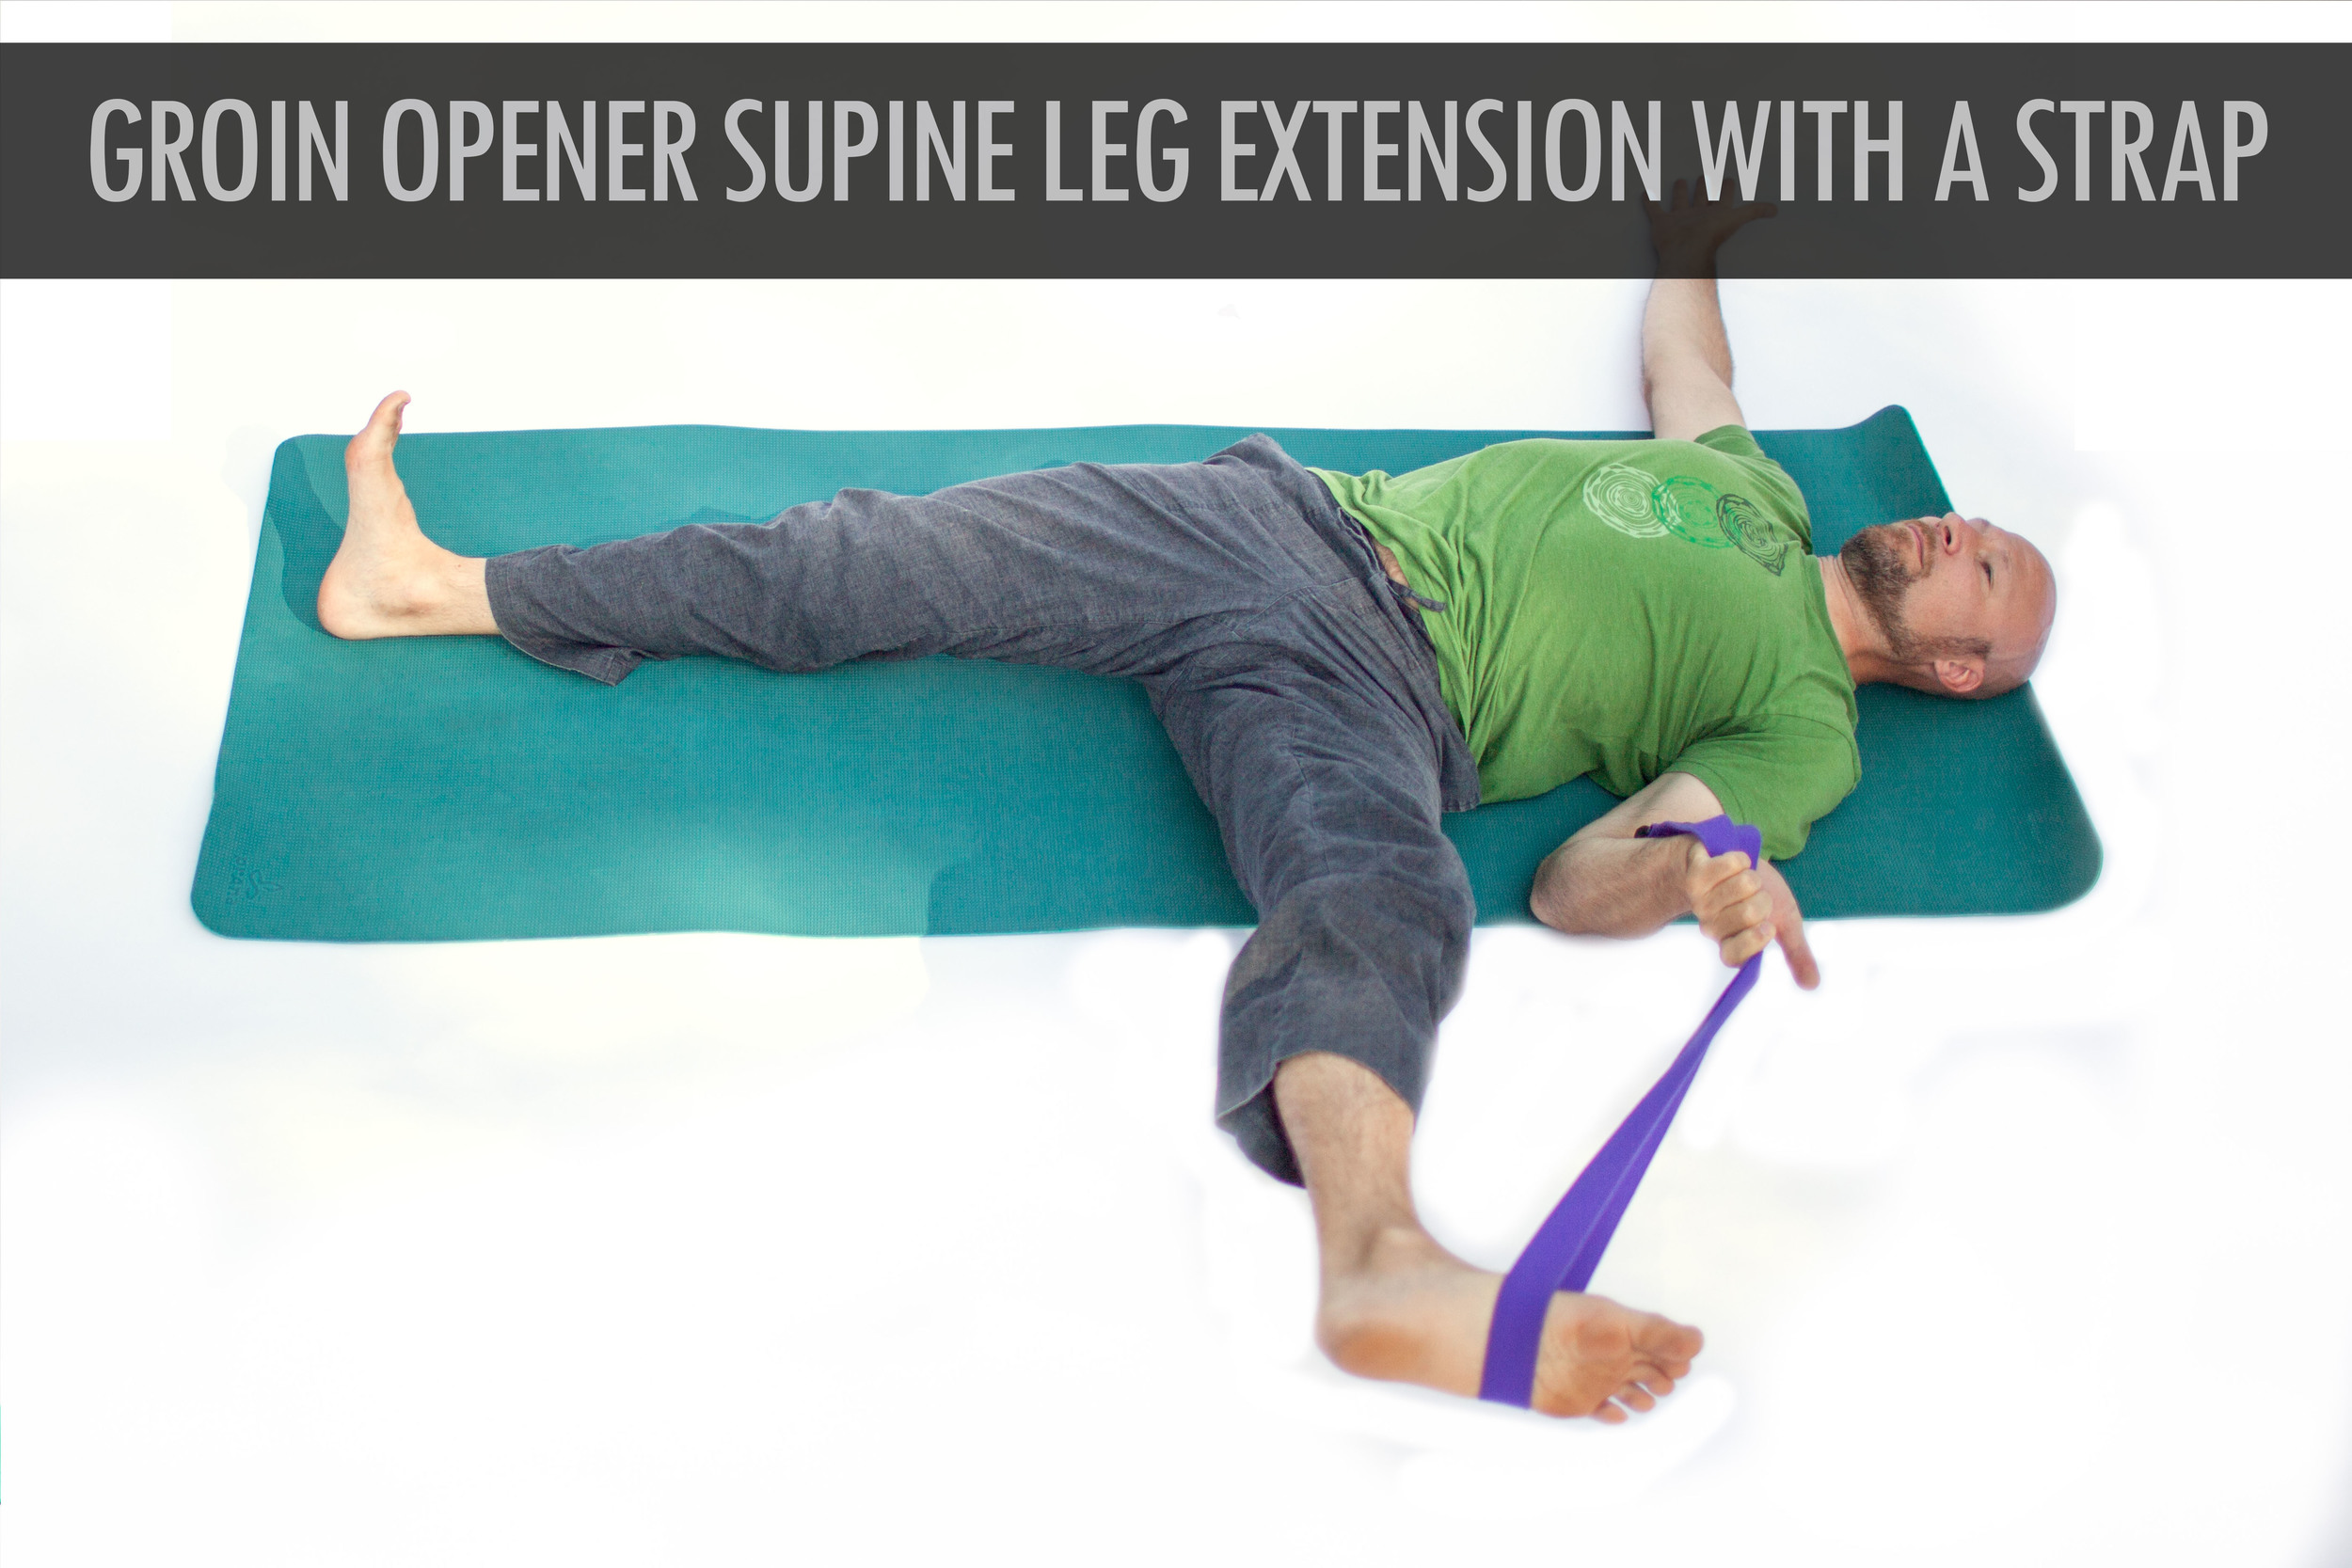 Groin Opener Supine Leg Extension With A Strap 2.jpg